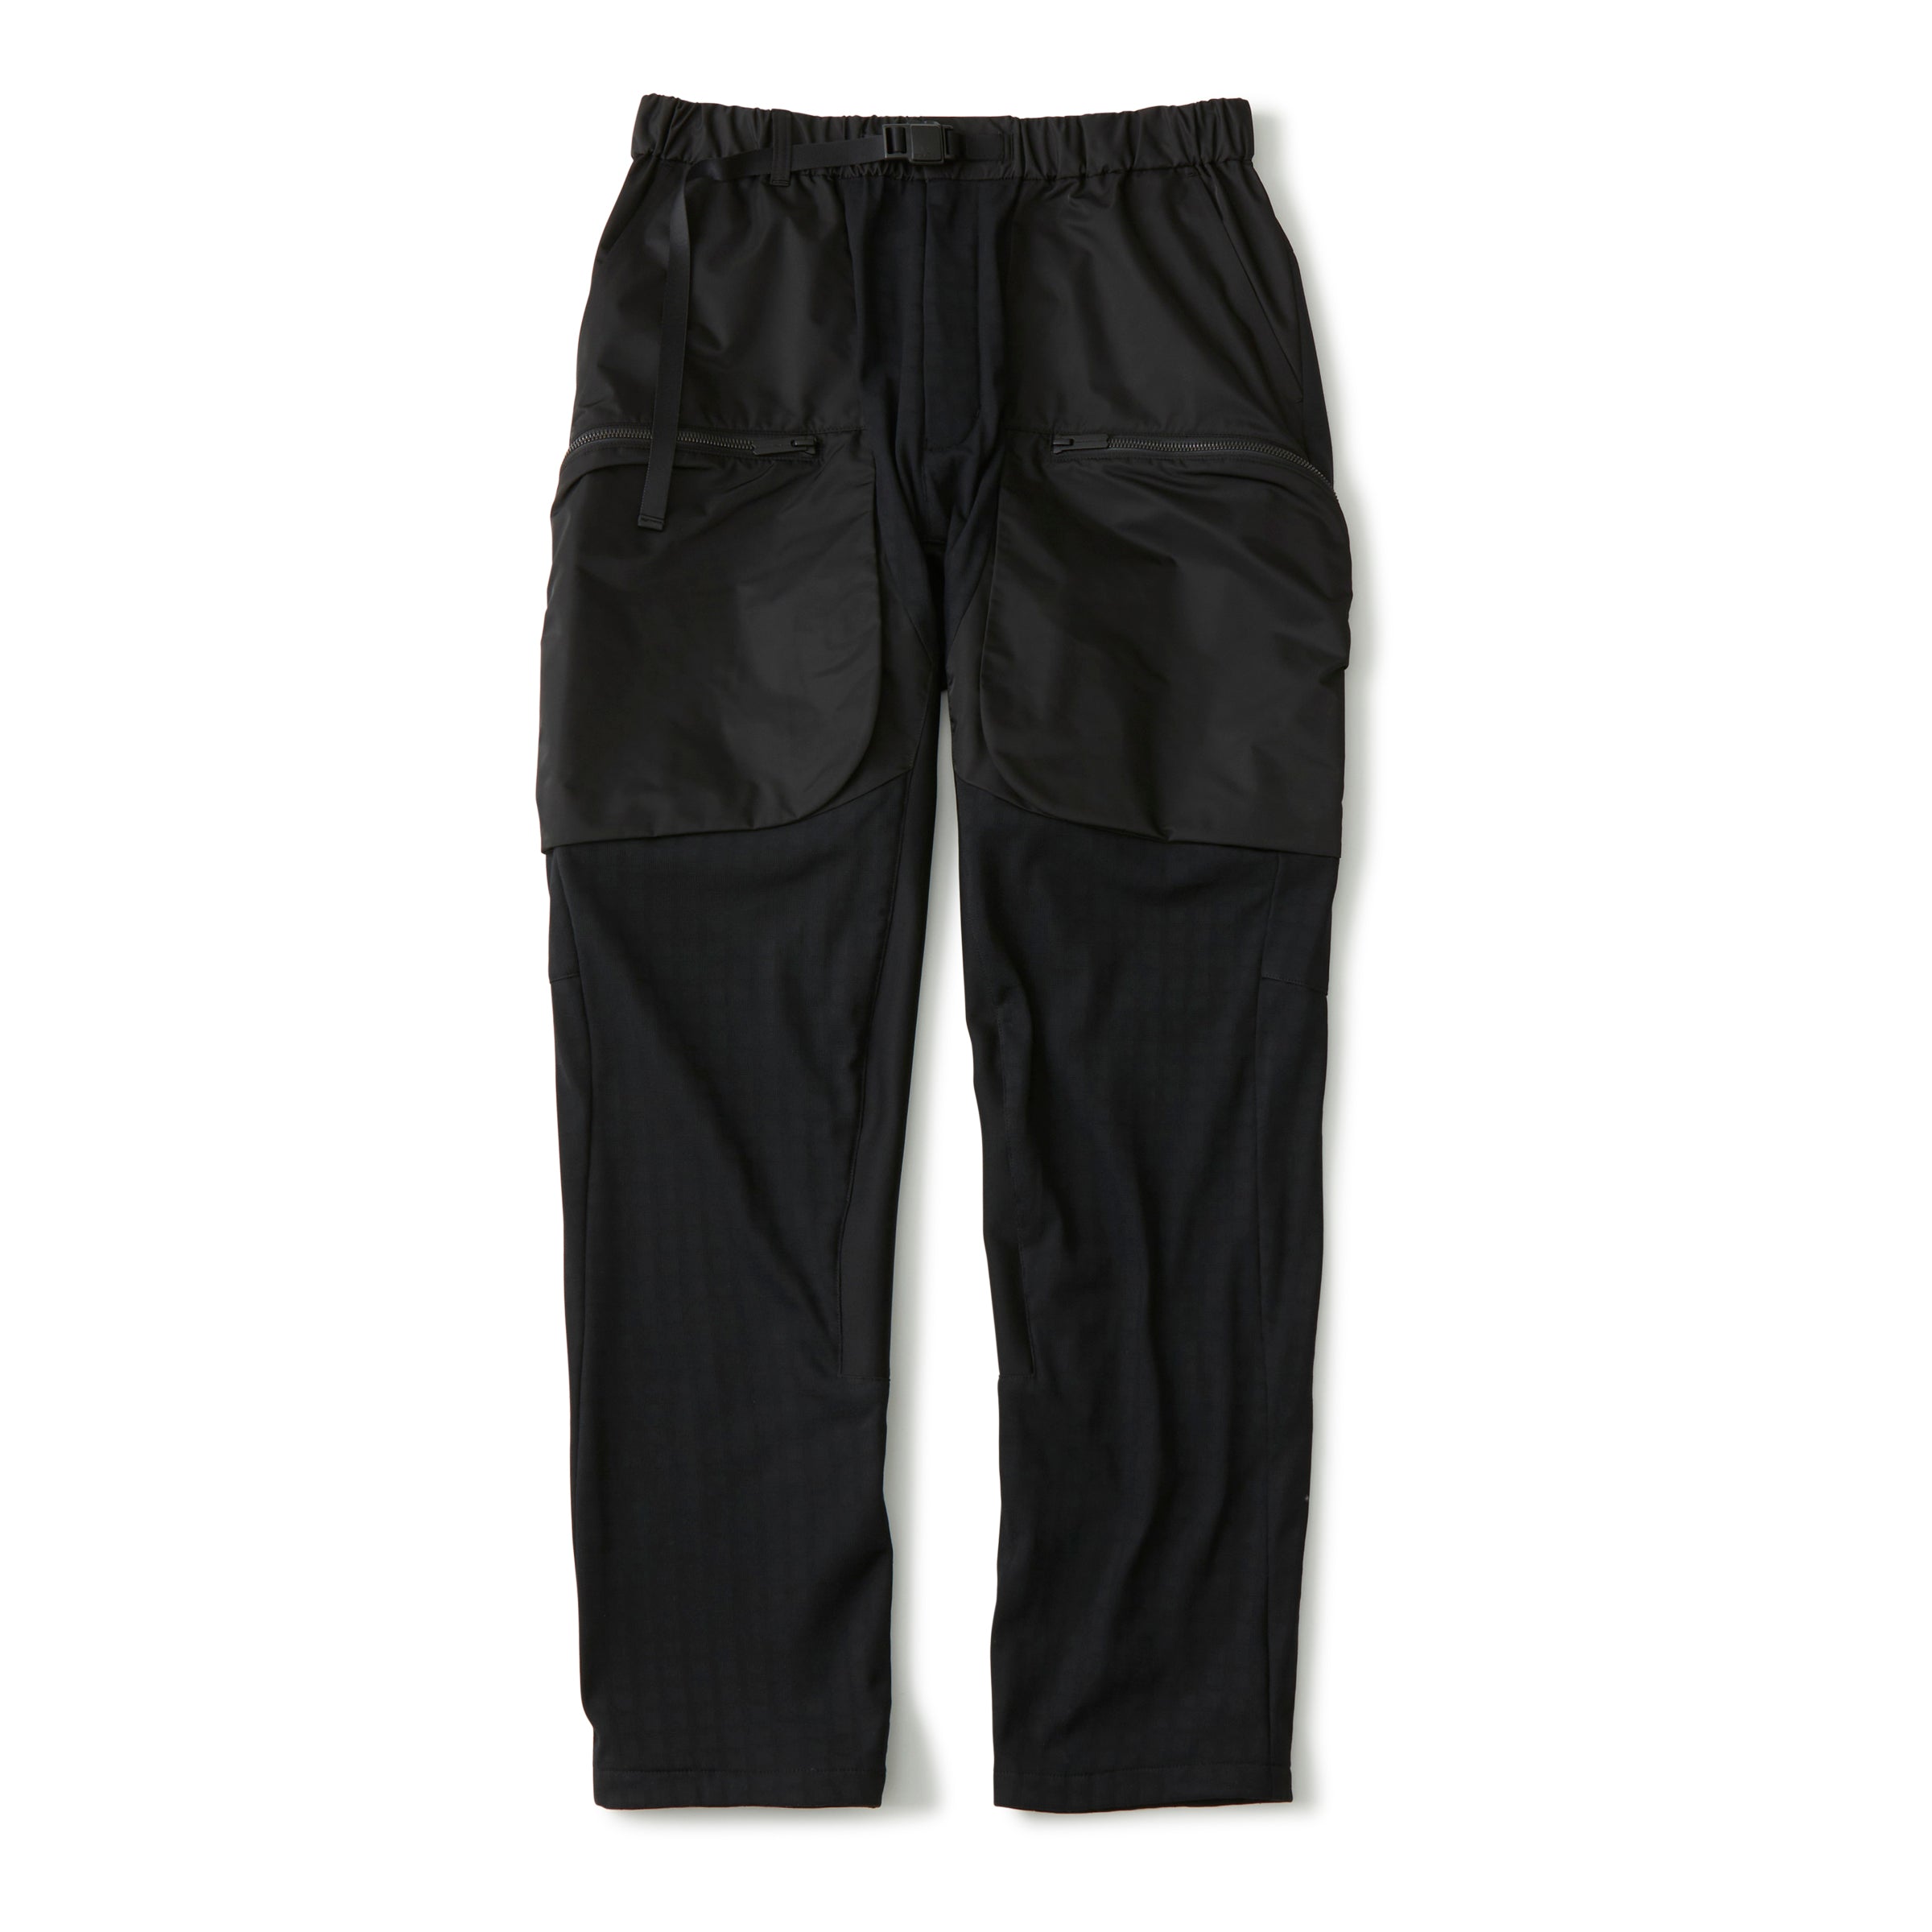 OCTA MOTORCYCLE PANTS – White Mountaineering OFFICIAL WEB SITE.